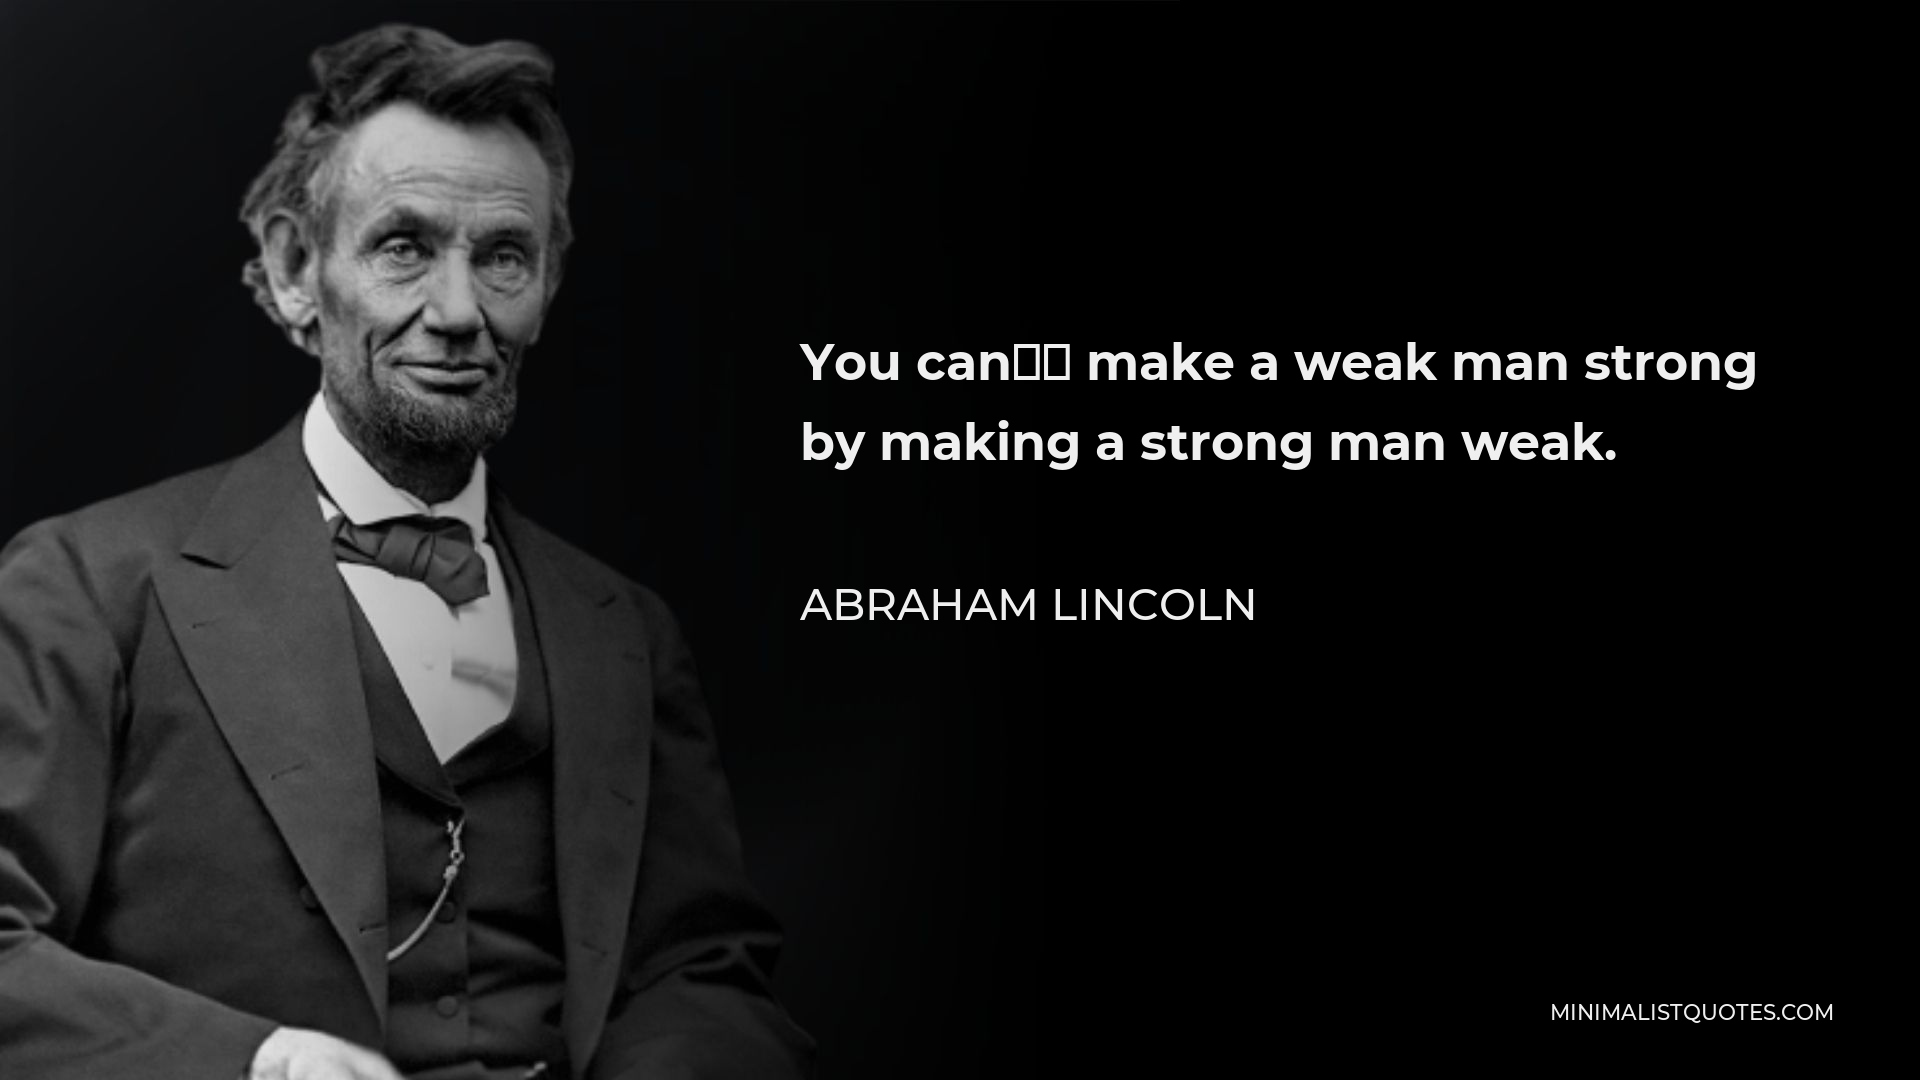 Abraham Lincoln Quote - You can’t make a weak man strong by making a strong man weak.